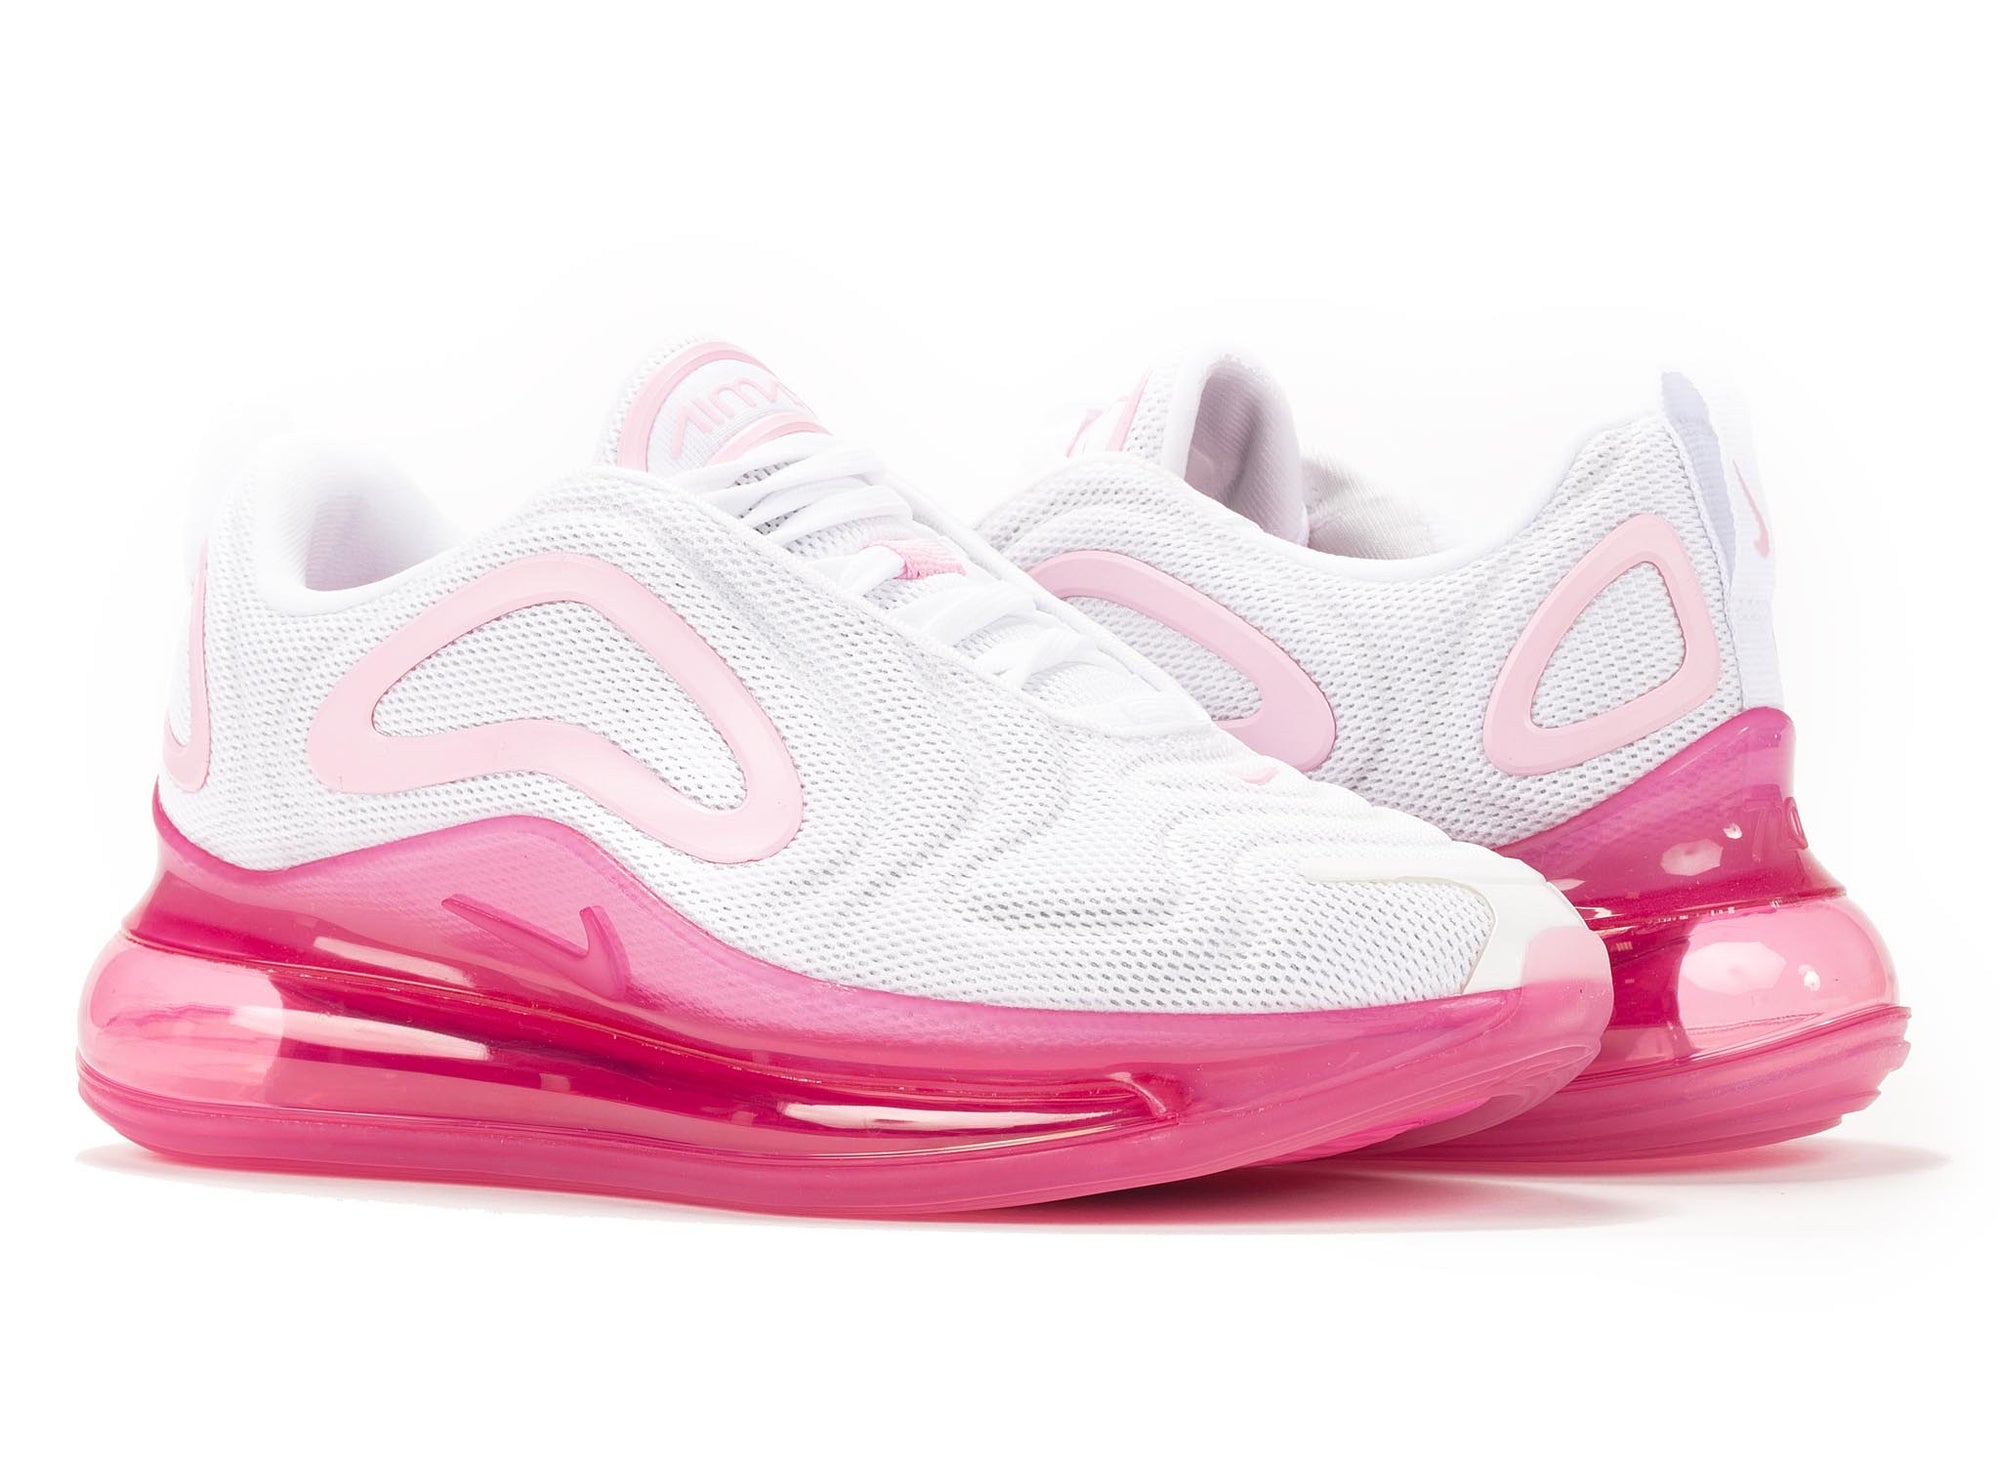 air max 720 pink and white